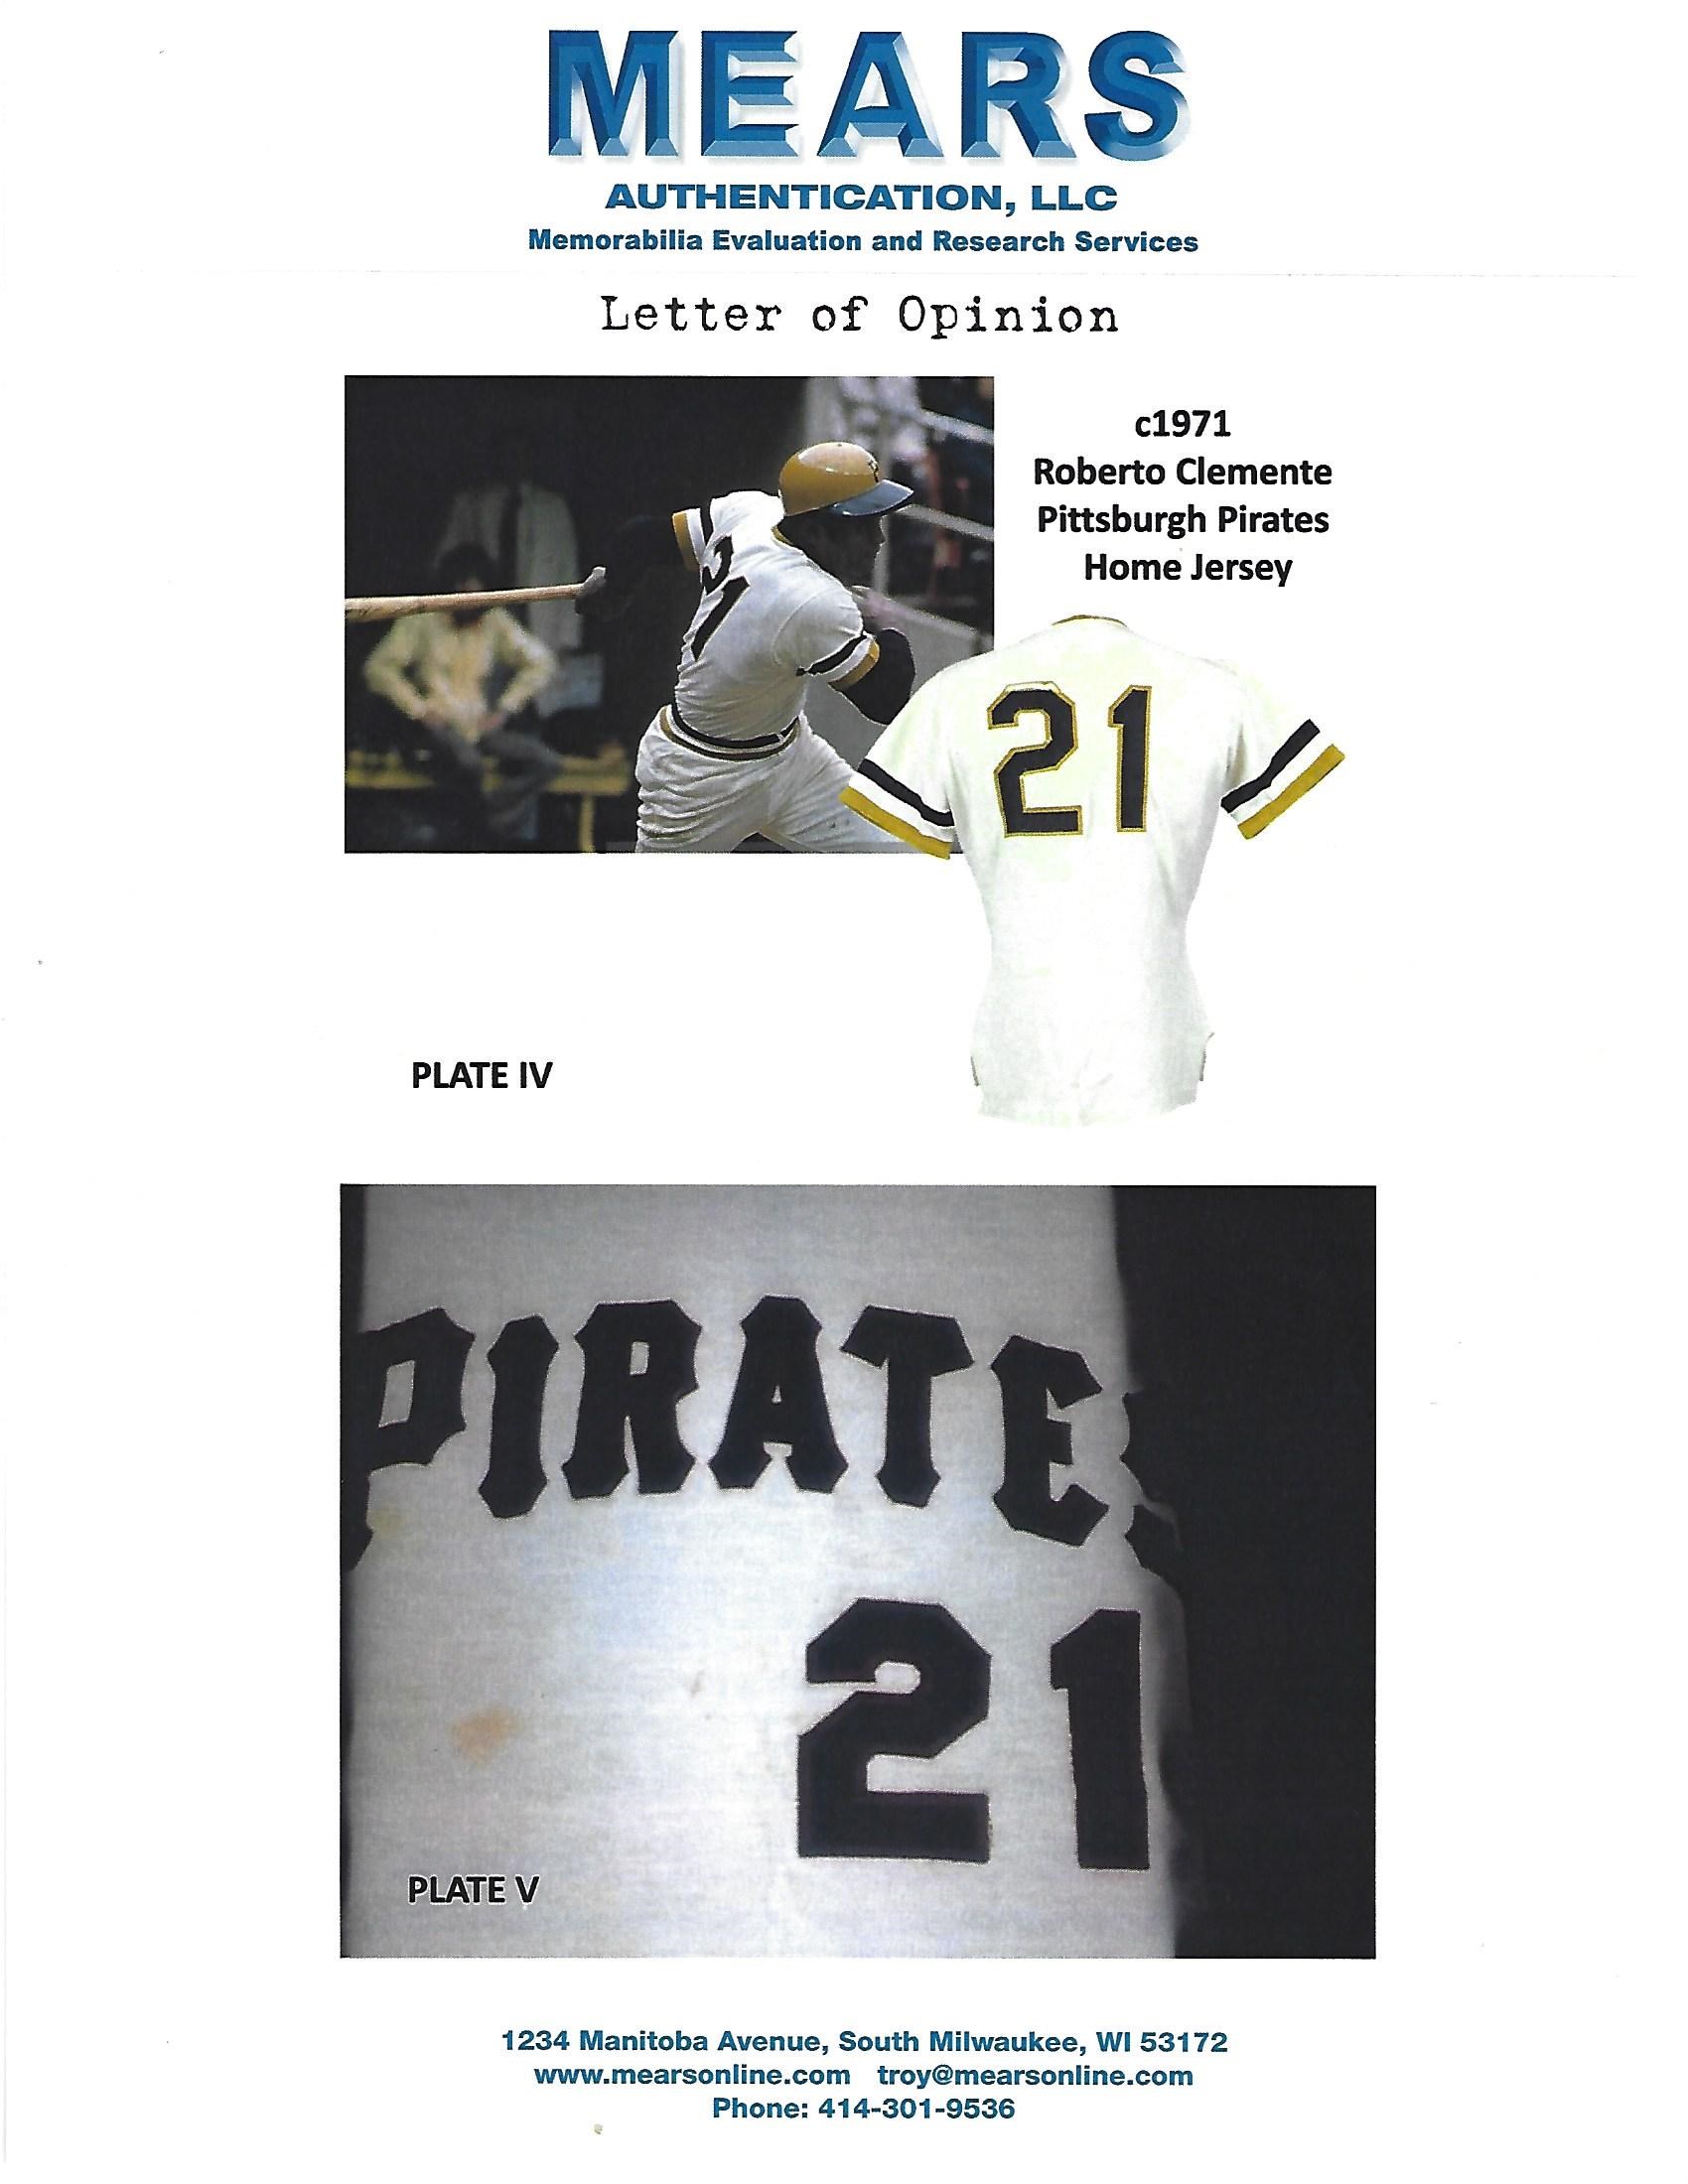 21 - Team Issued White Pinstripe Jersey - Roberto Clemente Day